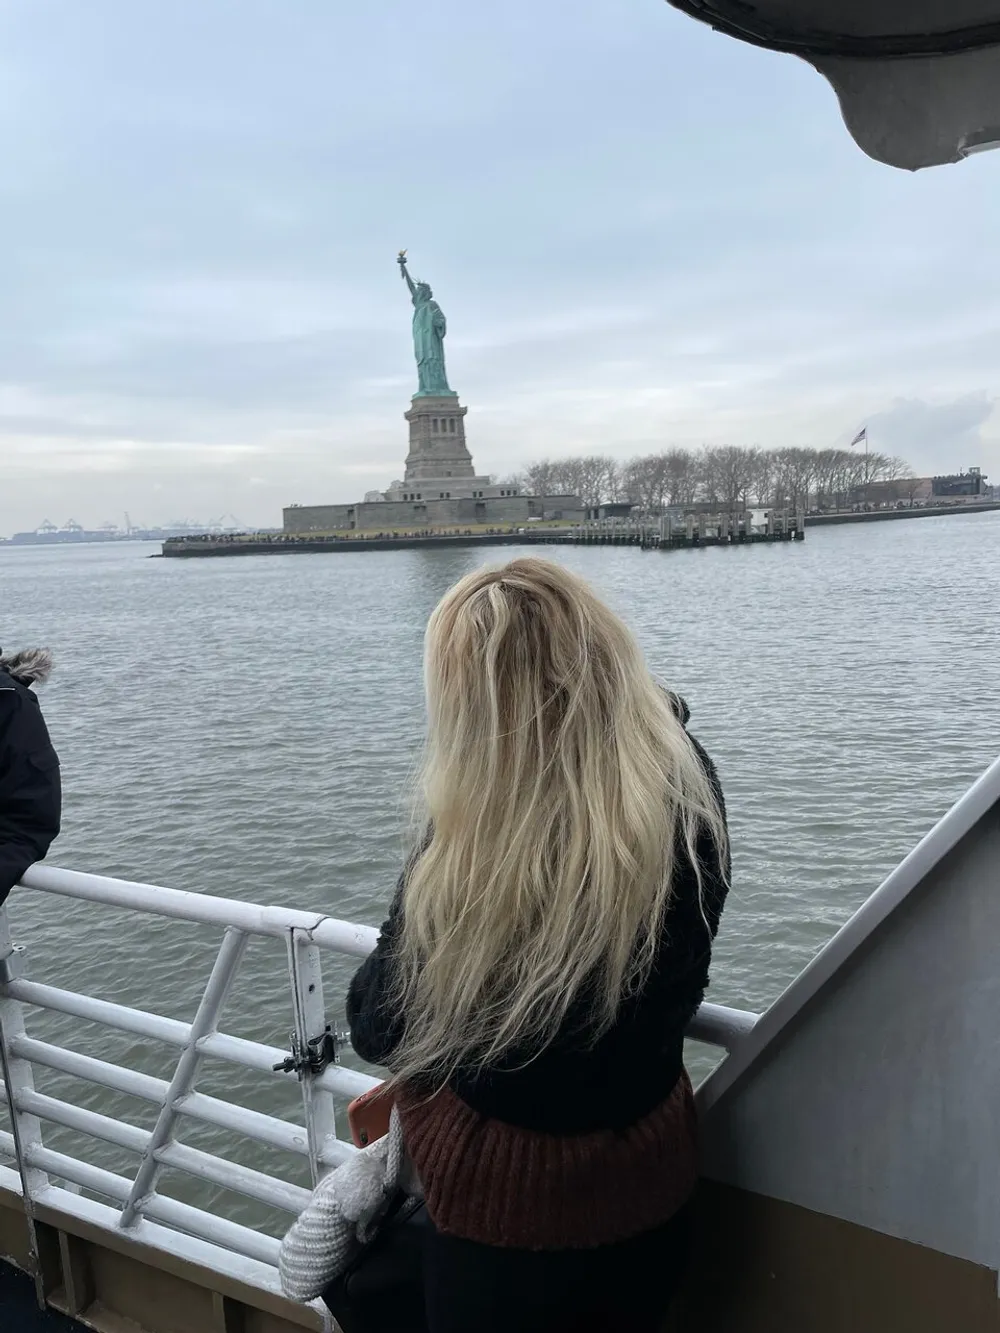 A person is gazing at the Statue of Liberty from a boat